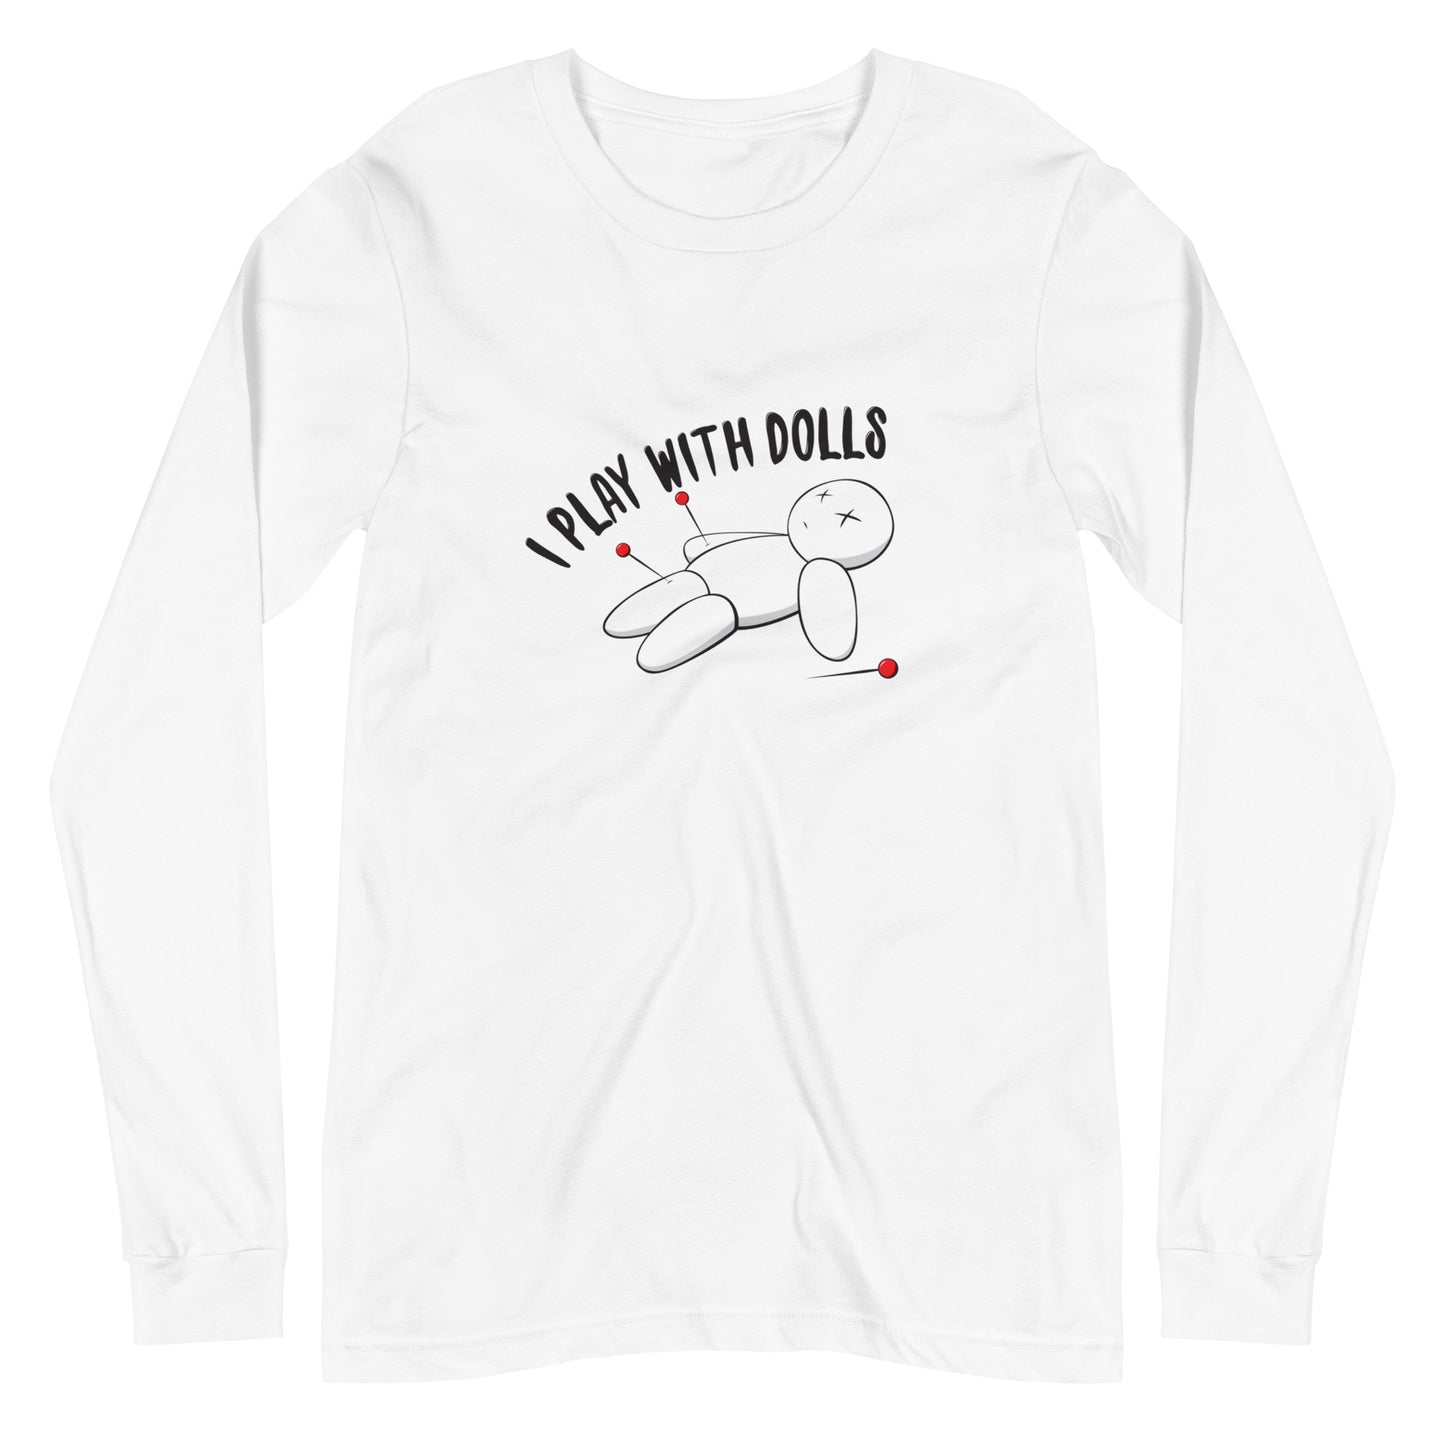 White long-sleeved t-shirt with graphic of white voodoo doll with Xs for eyes stuck with several pins and text "I PLAY WITH DOLLS"